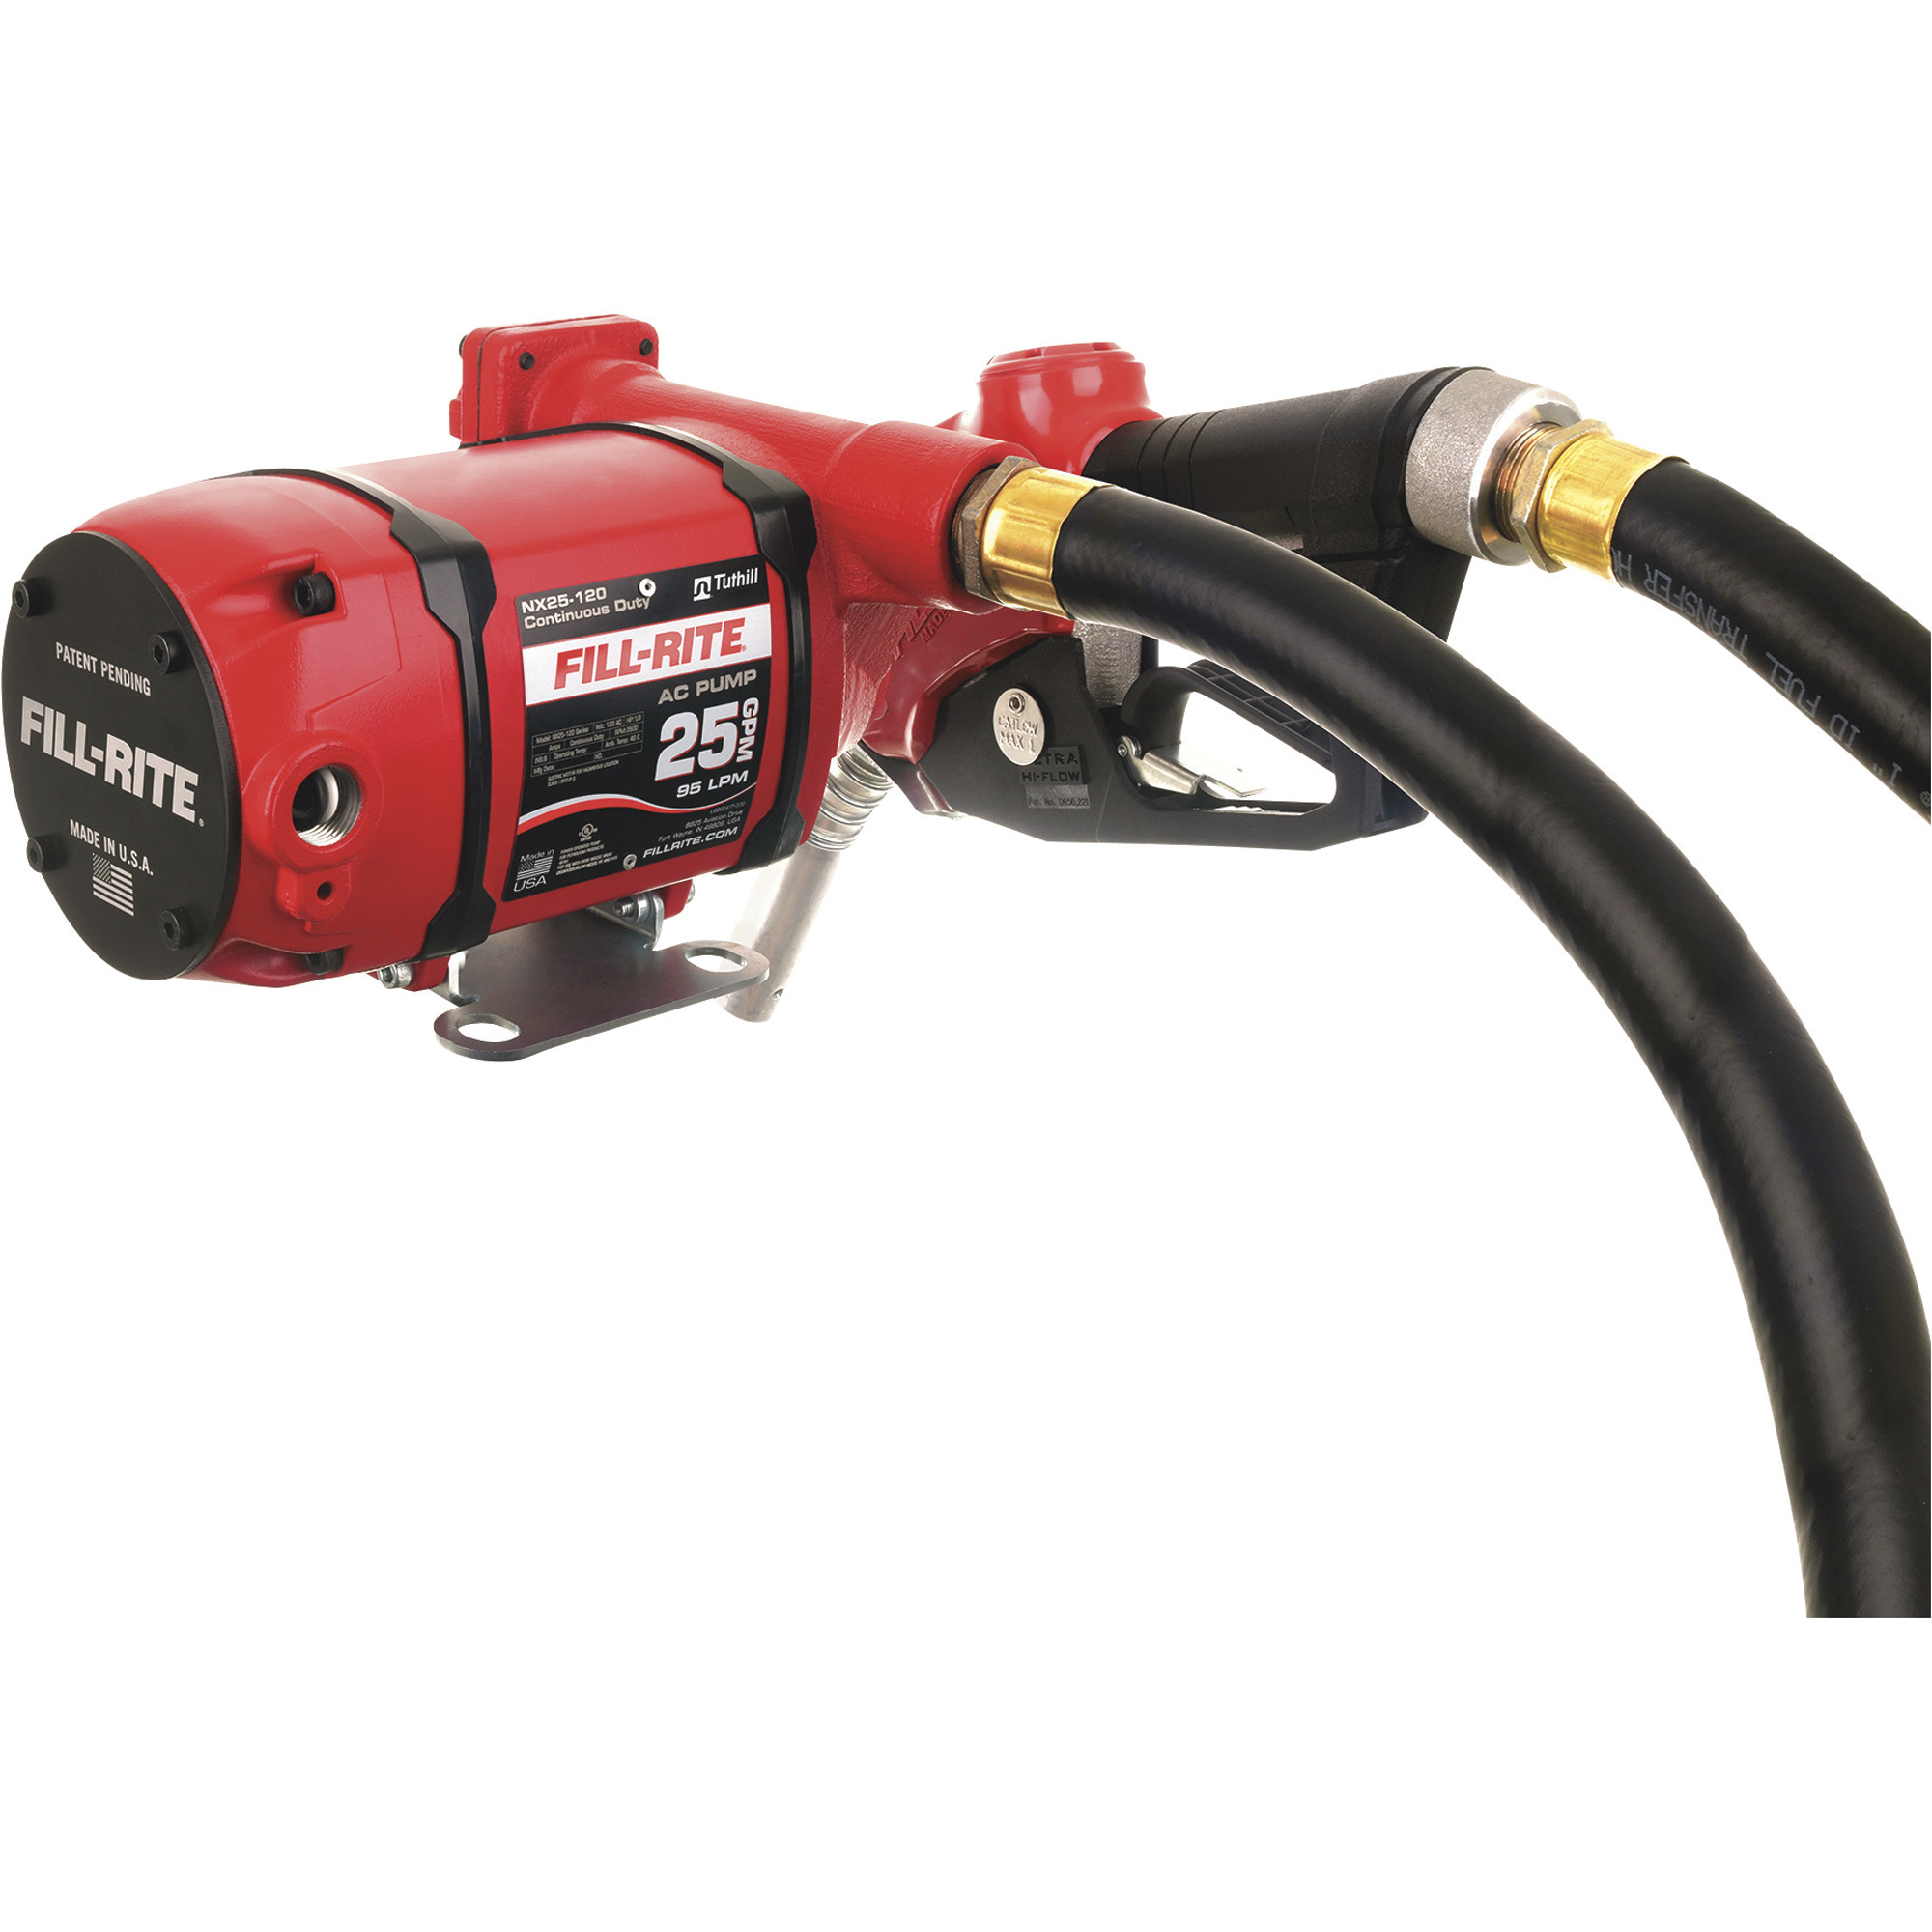 Roughneck Spring-Rewind Fuel and Oil Hose Reel with Hoses, 3/4in. x 25ft.  Hose and 3/4in. x 6ft. Lead-In, 1250 PSI, Model# HRM808086-15NTE